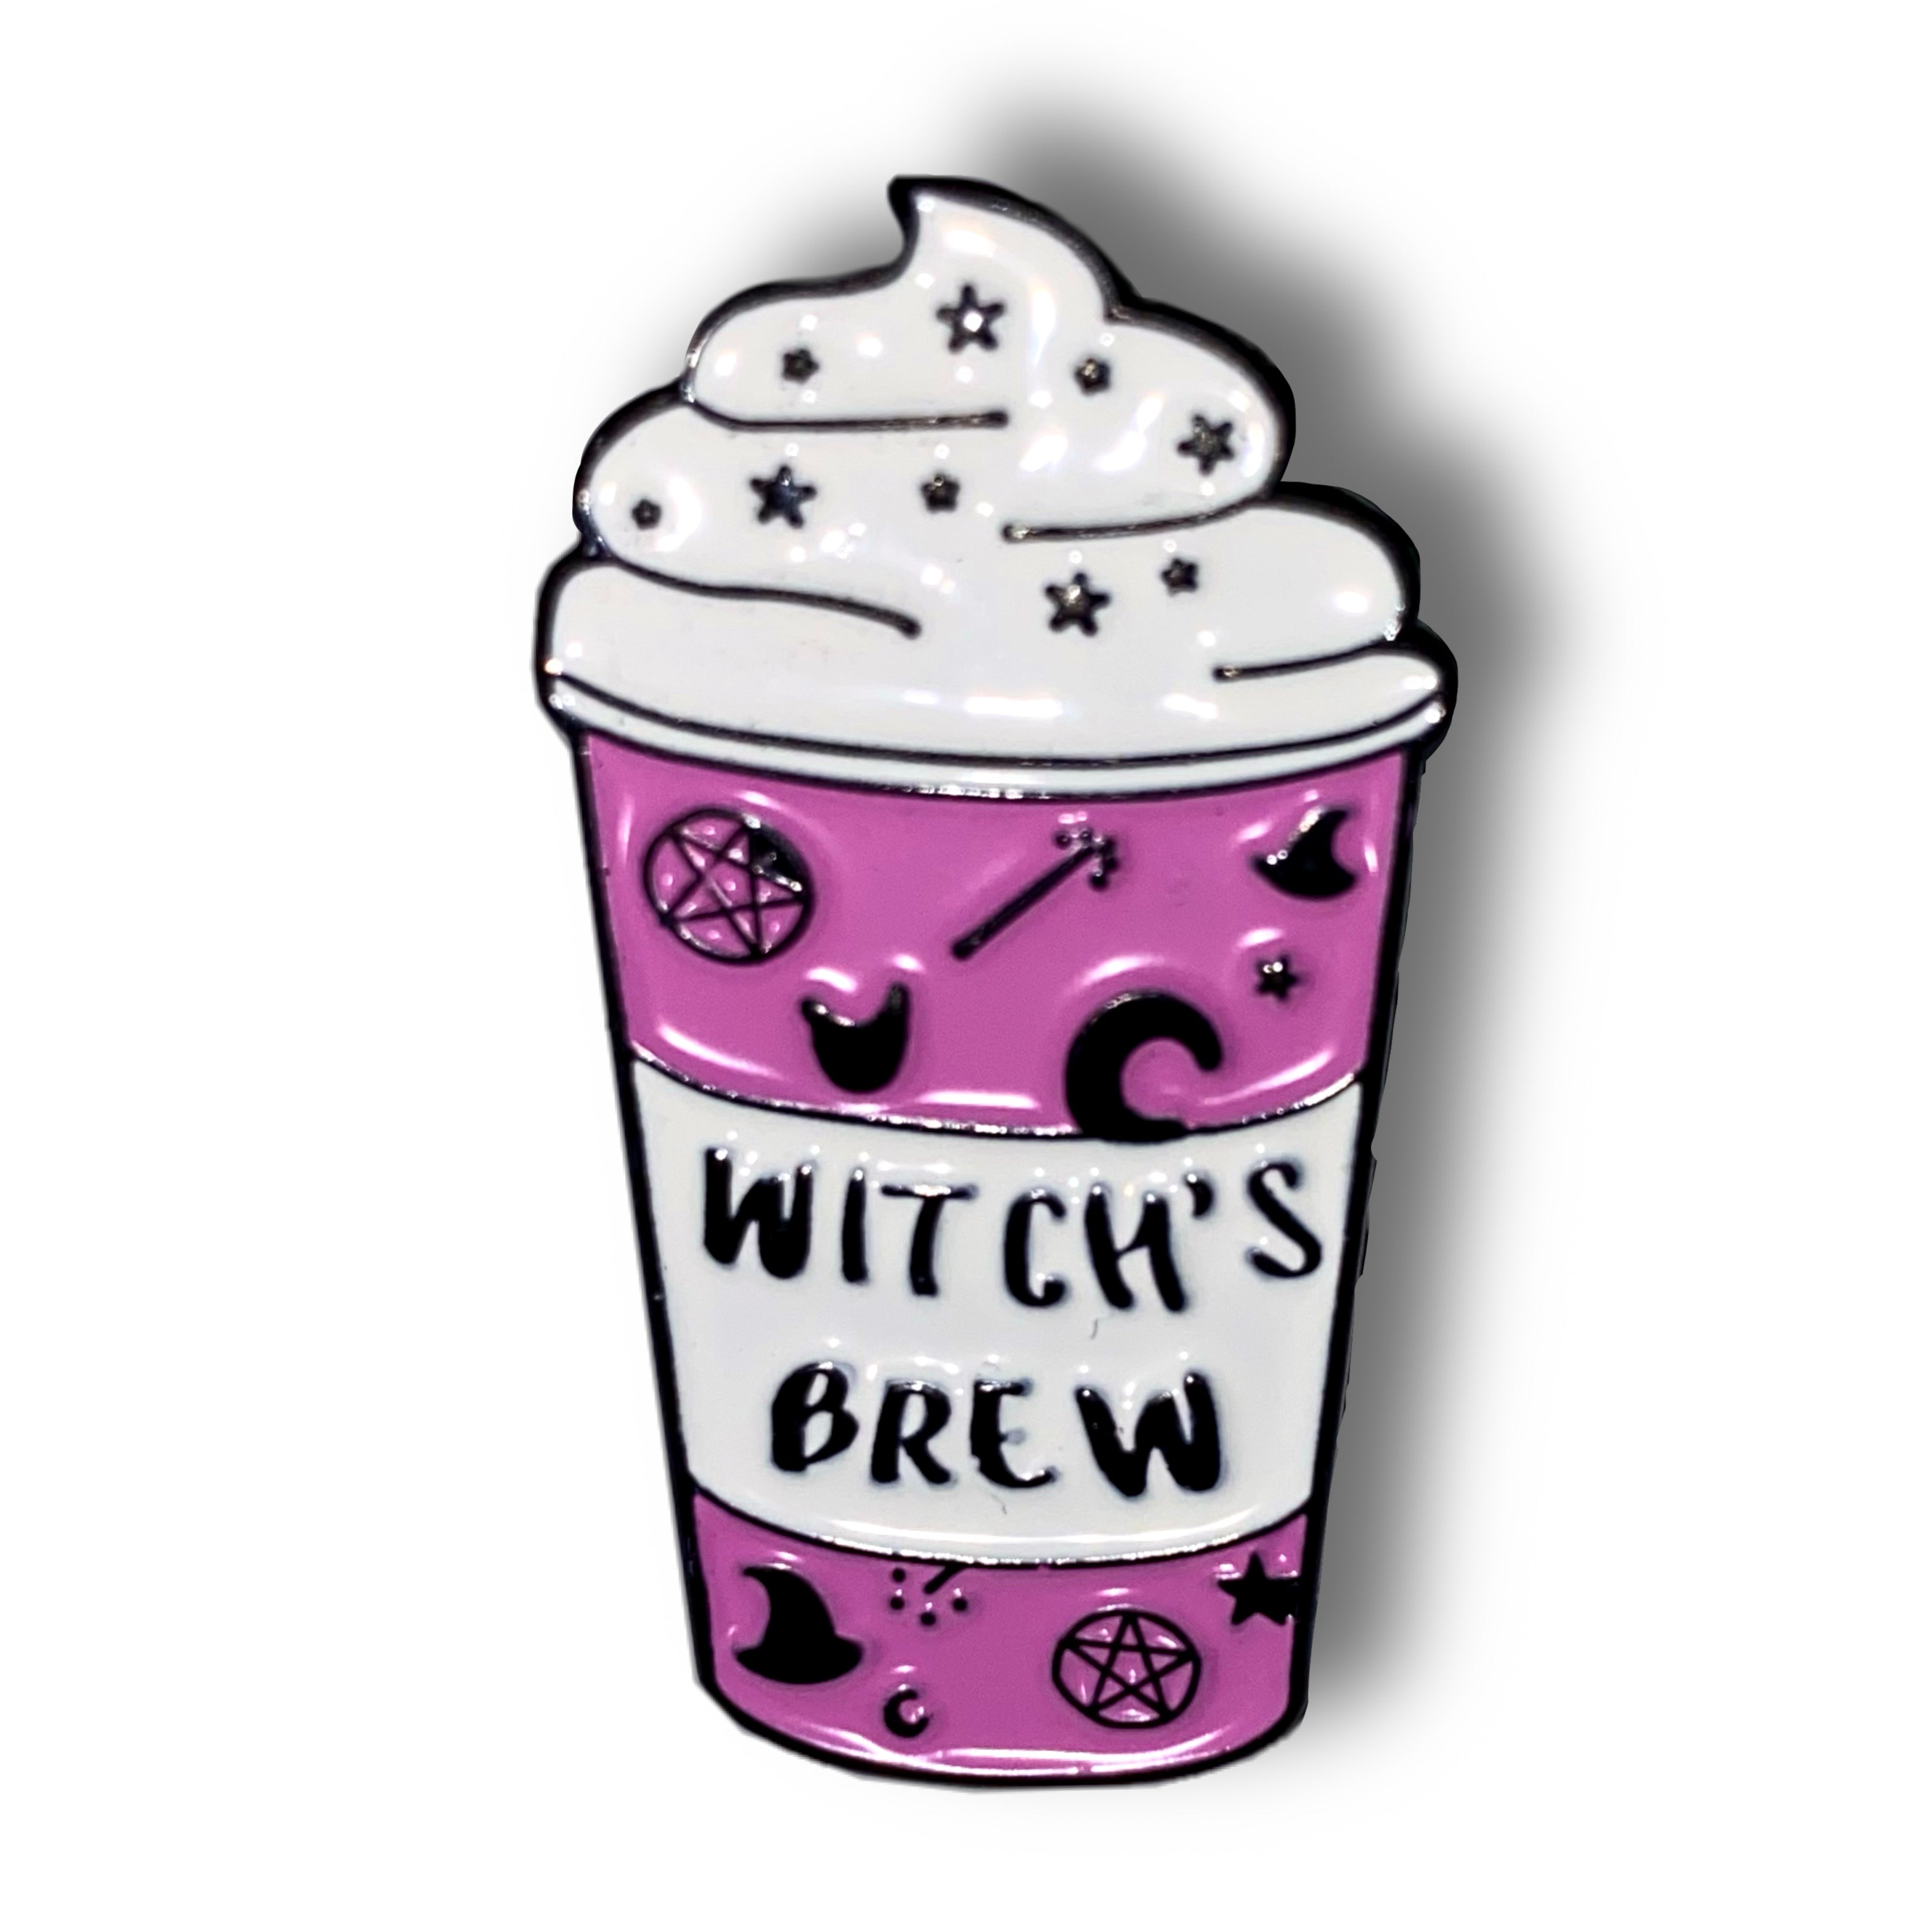 Witches Brew Enamel Pin Badge